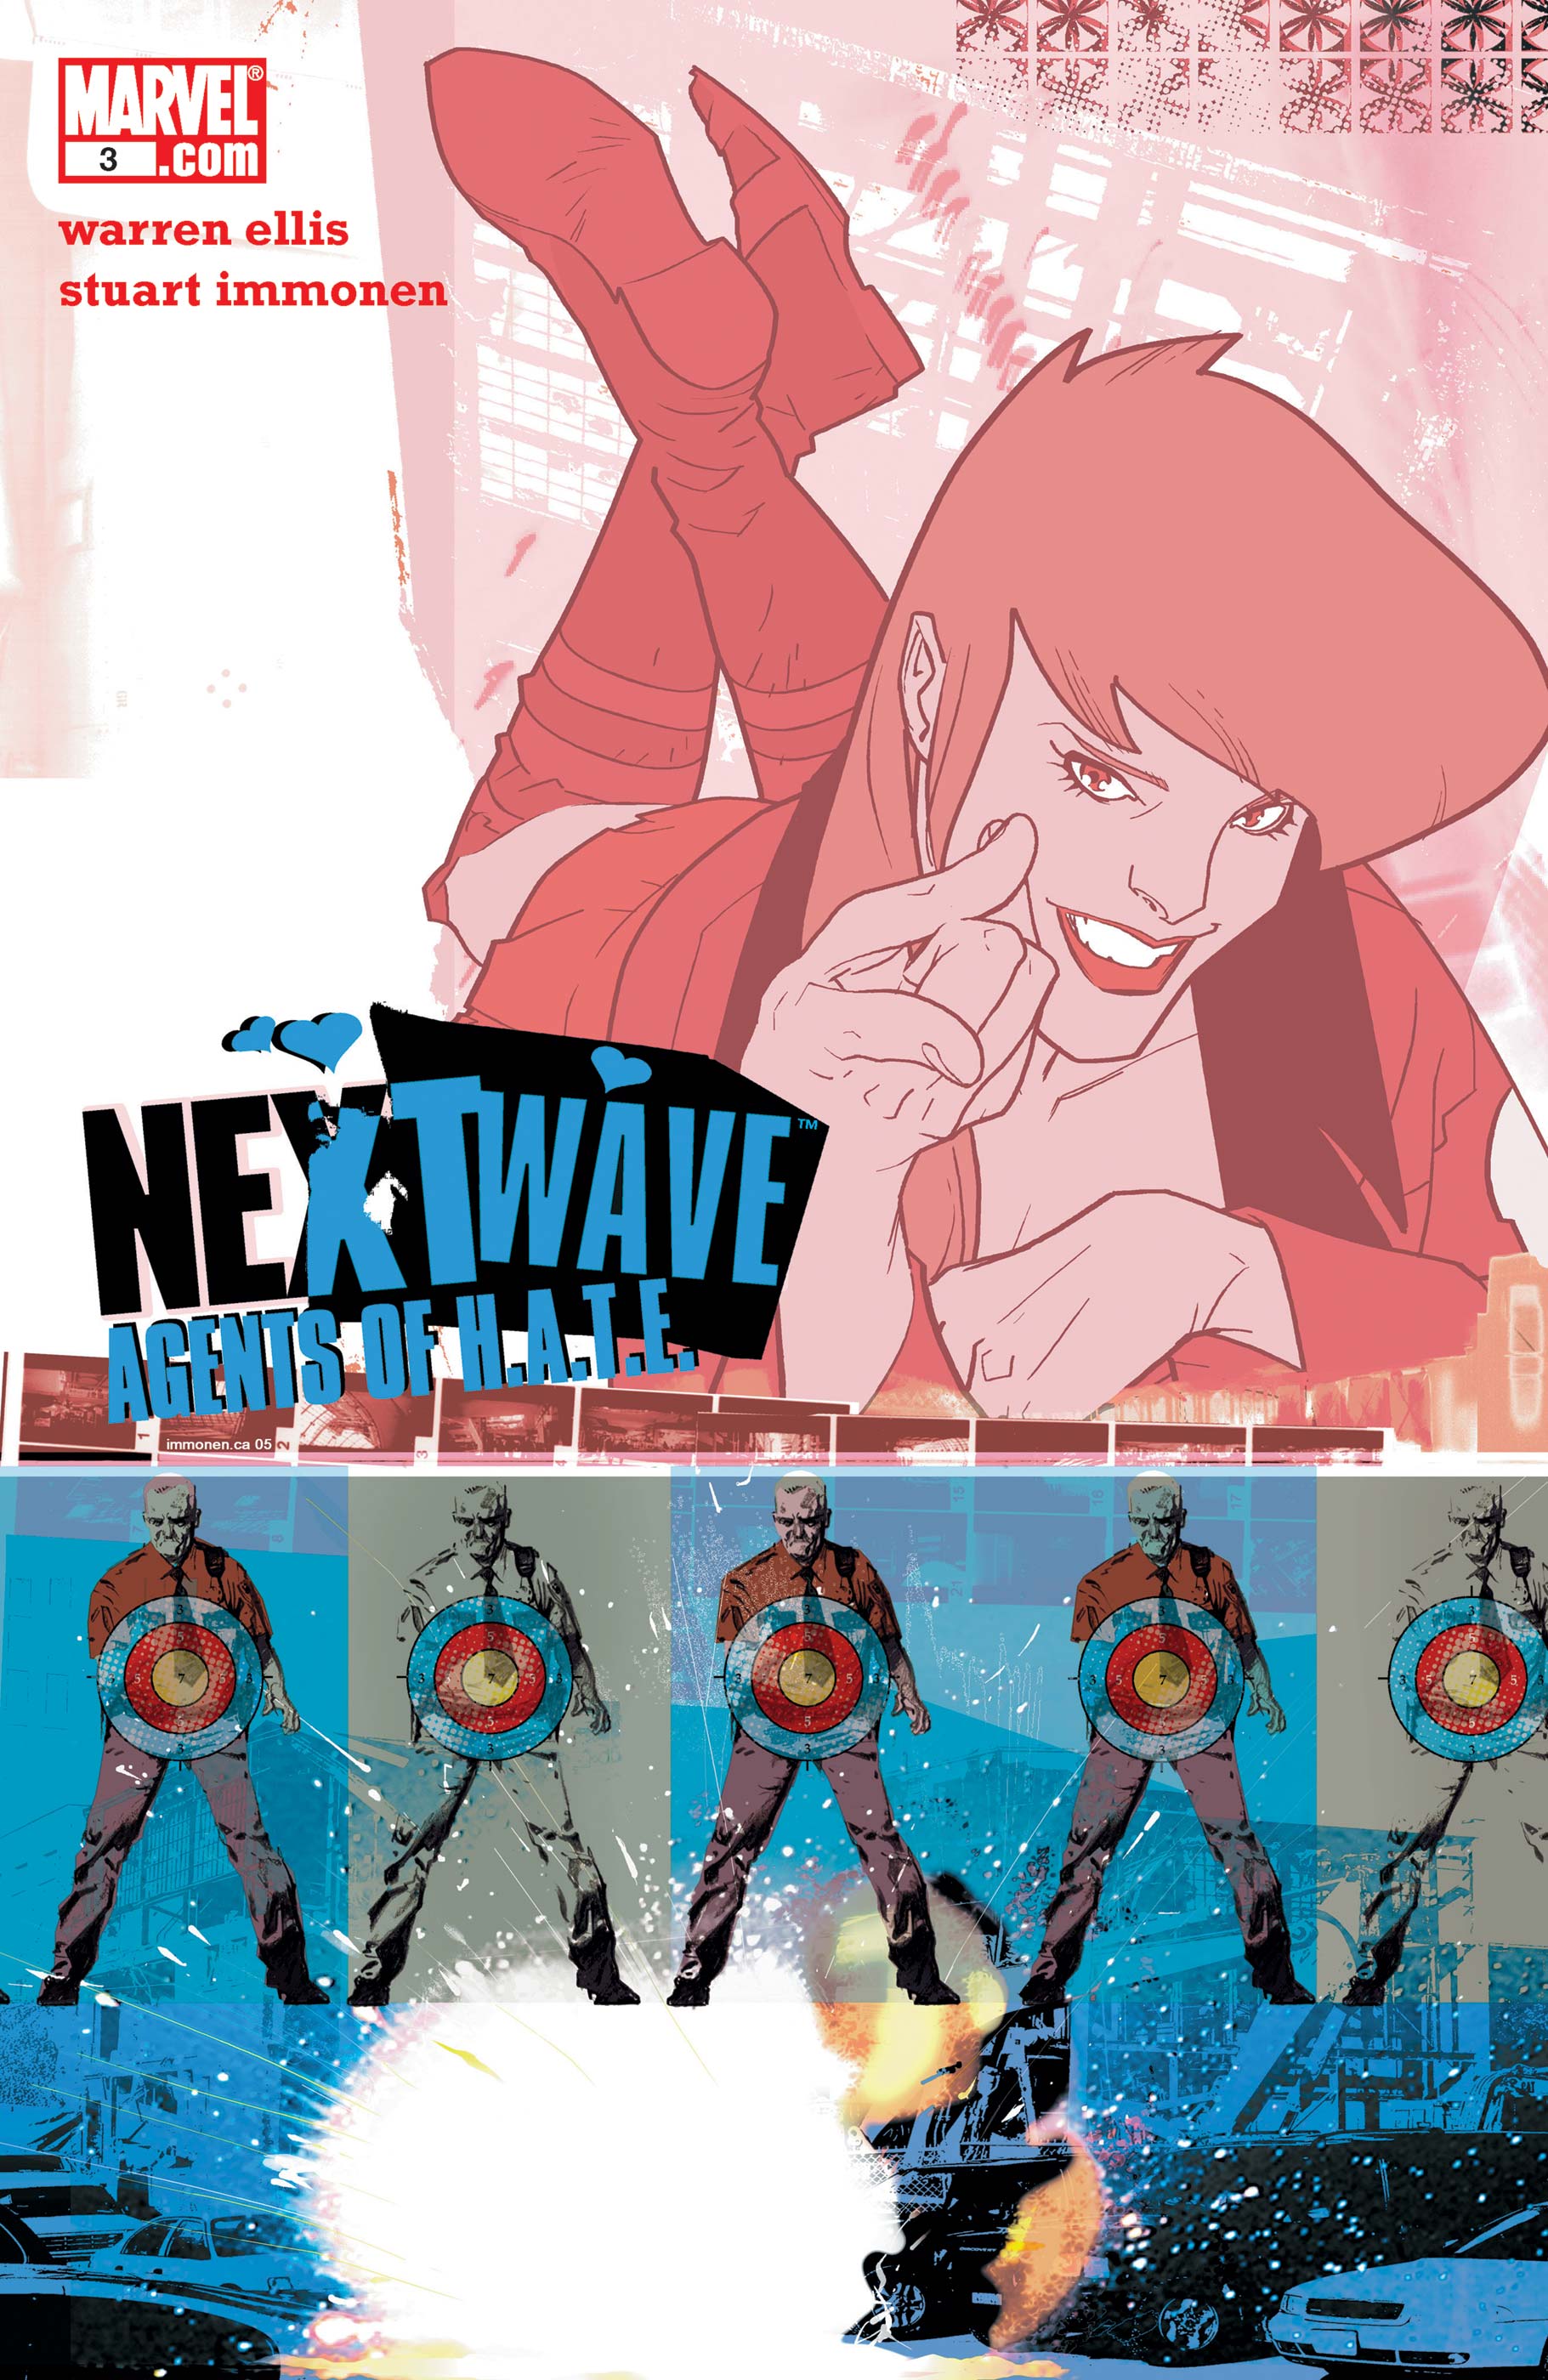 Nextwave: Agents of H.a.T.E. (2006) #3 | Comic Issues | Marvel